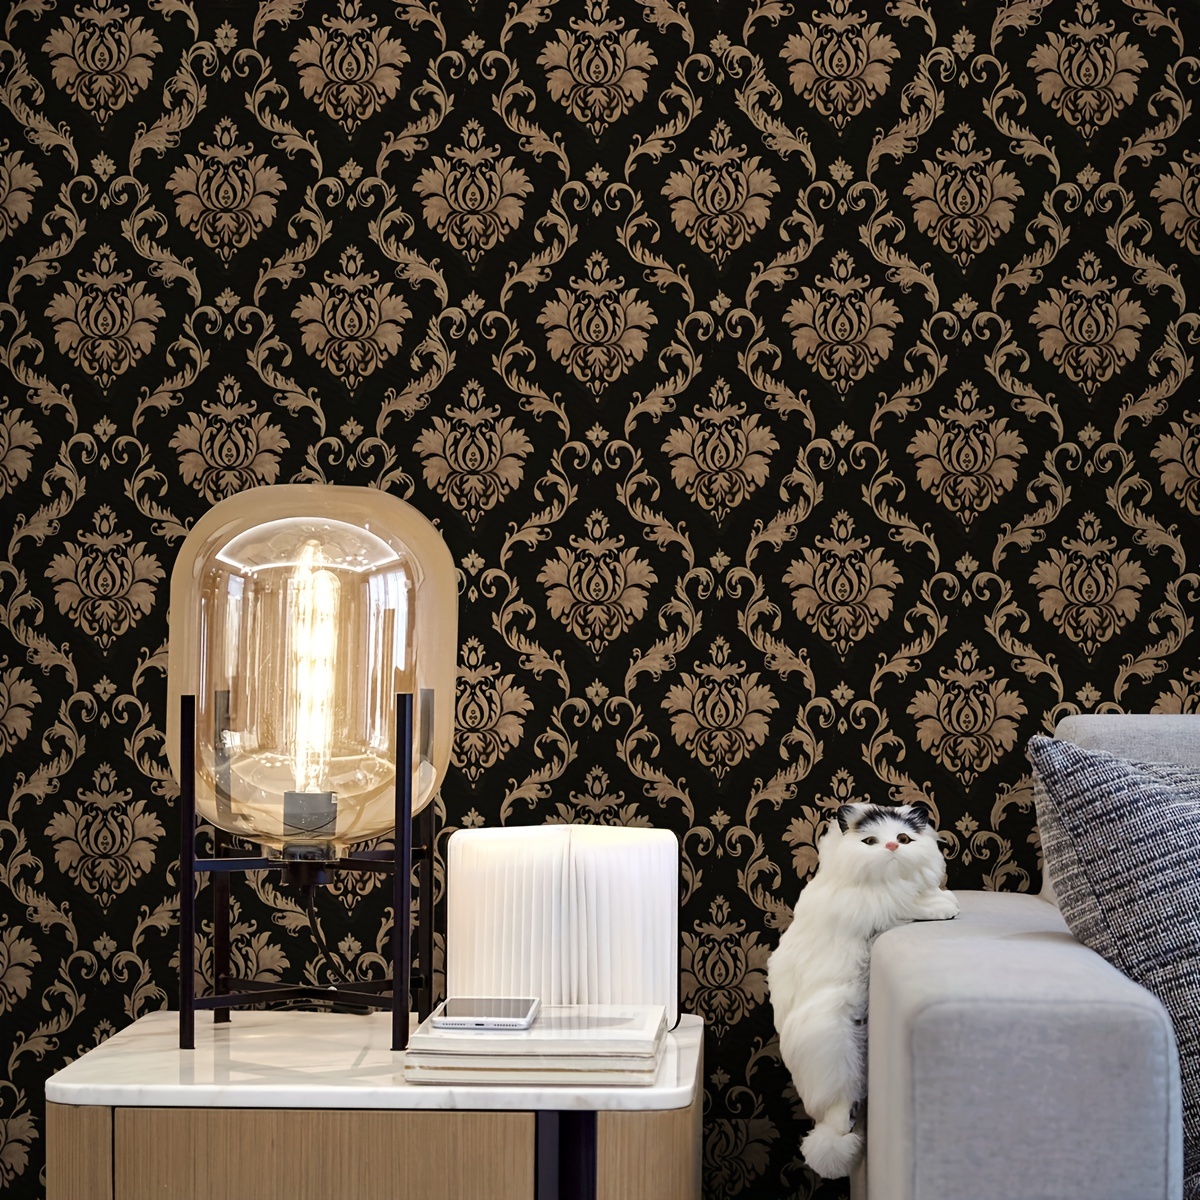 Gold Contact Paper 17.7 x 118 Metallic Peel and Stick Wallpaper Decorative Self Adhesive Paper Removable Waterproof Wallpaper for Furniture Home DIY